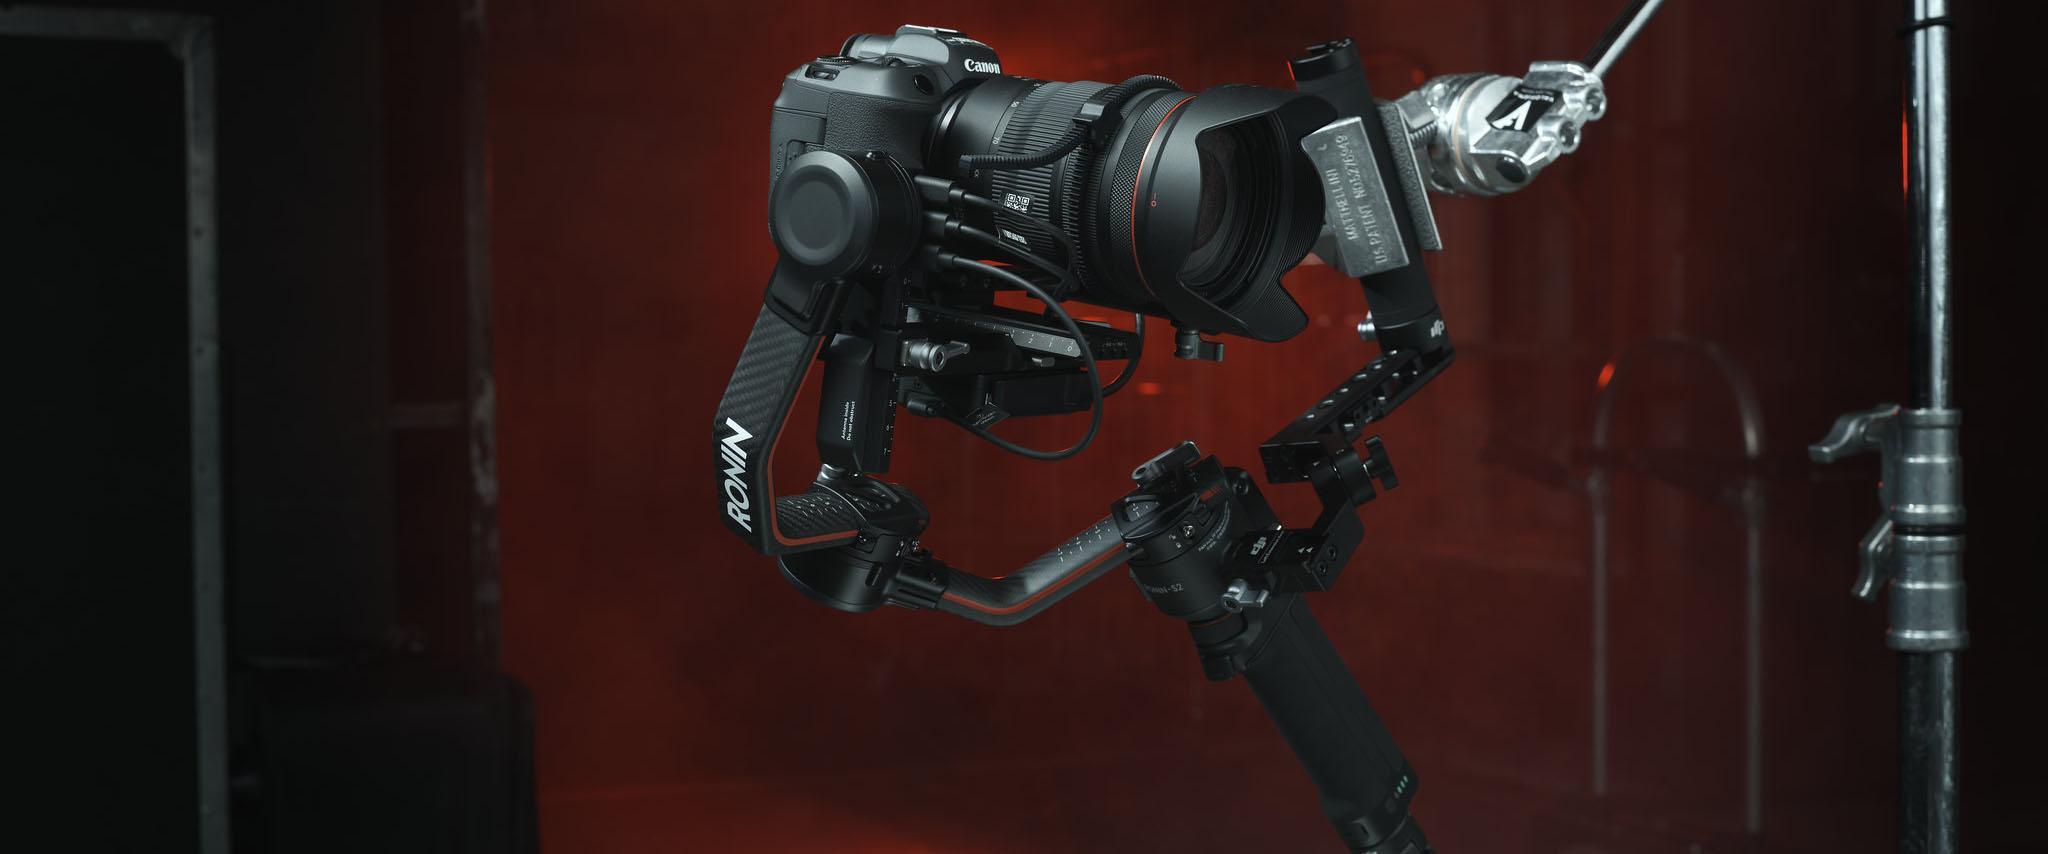 A professional filming setup with a Canon camera and a Ronin Rs2 in front of a red background.